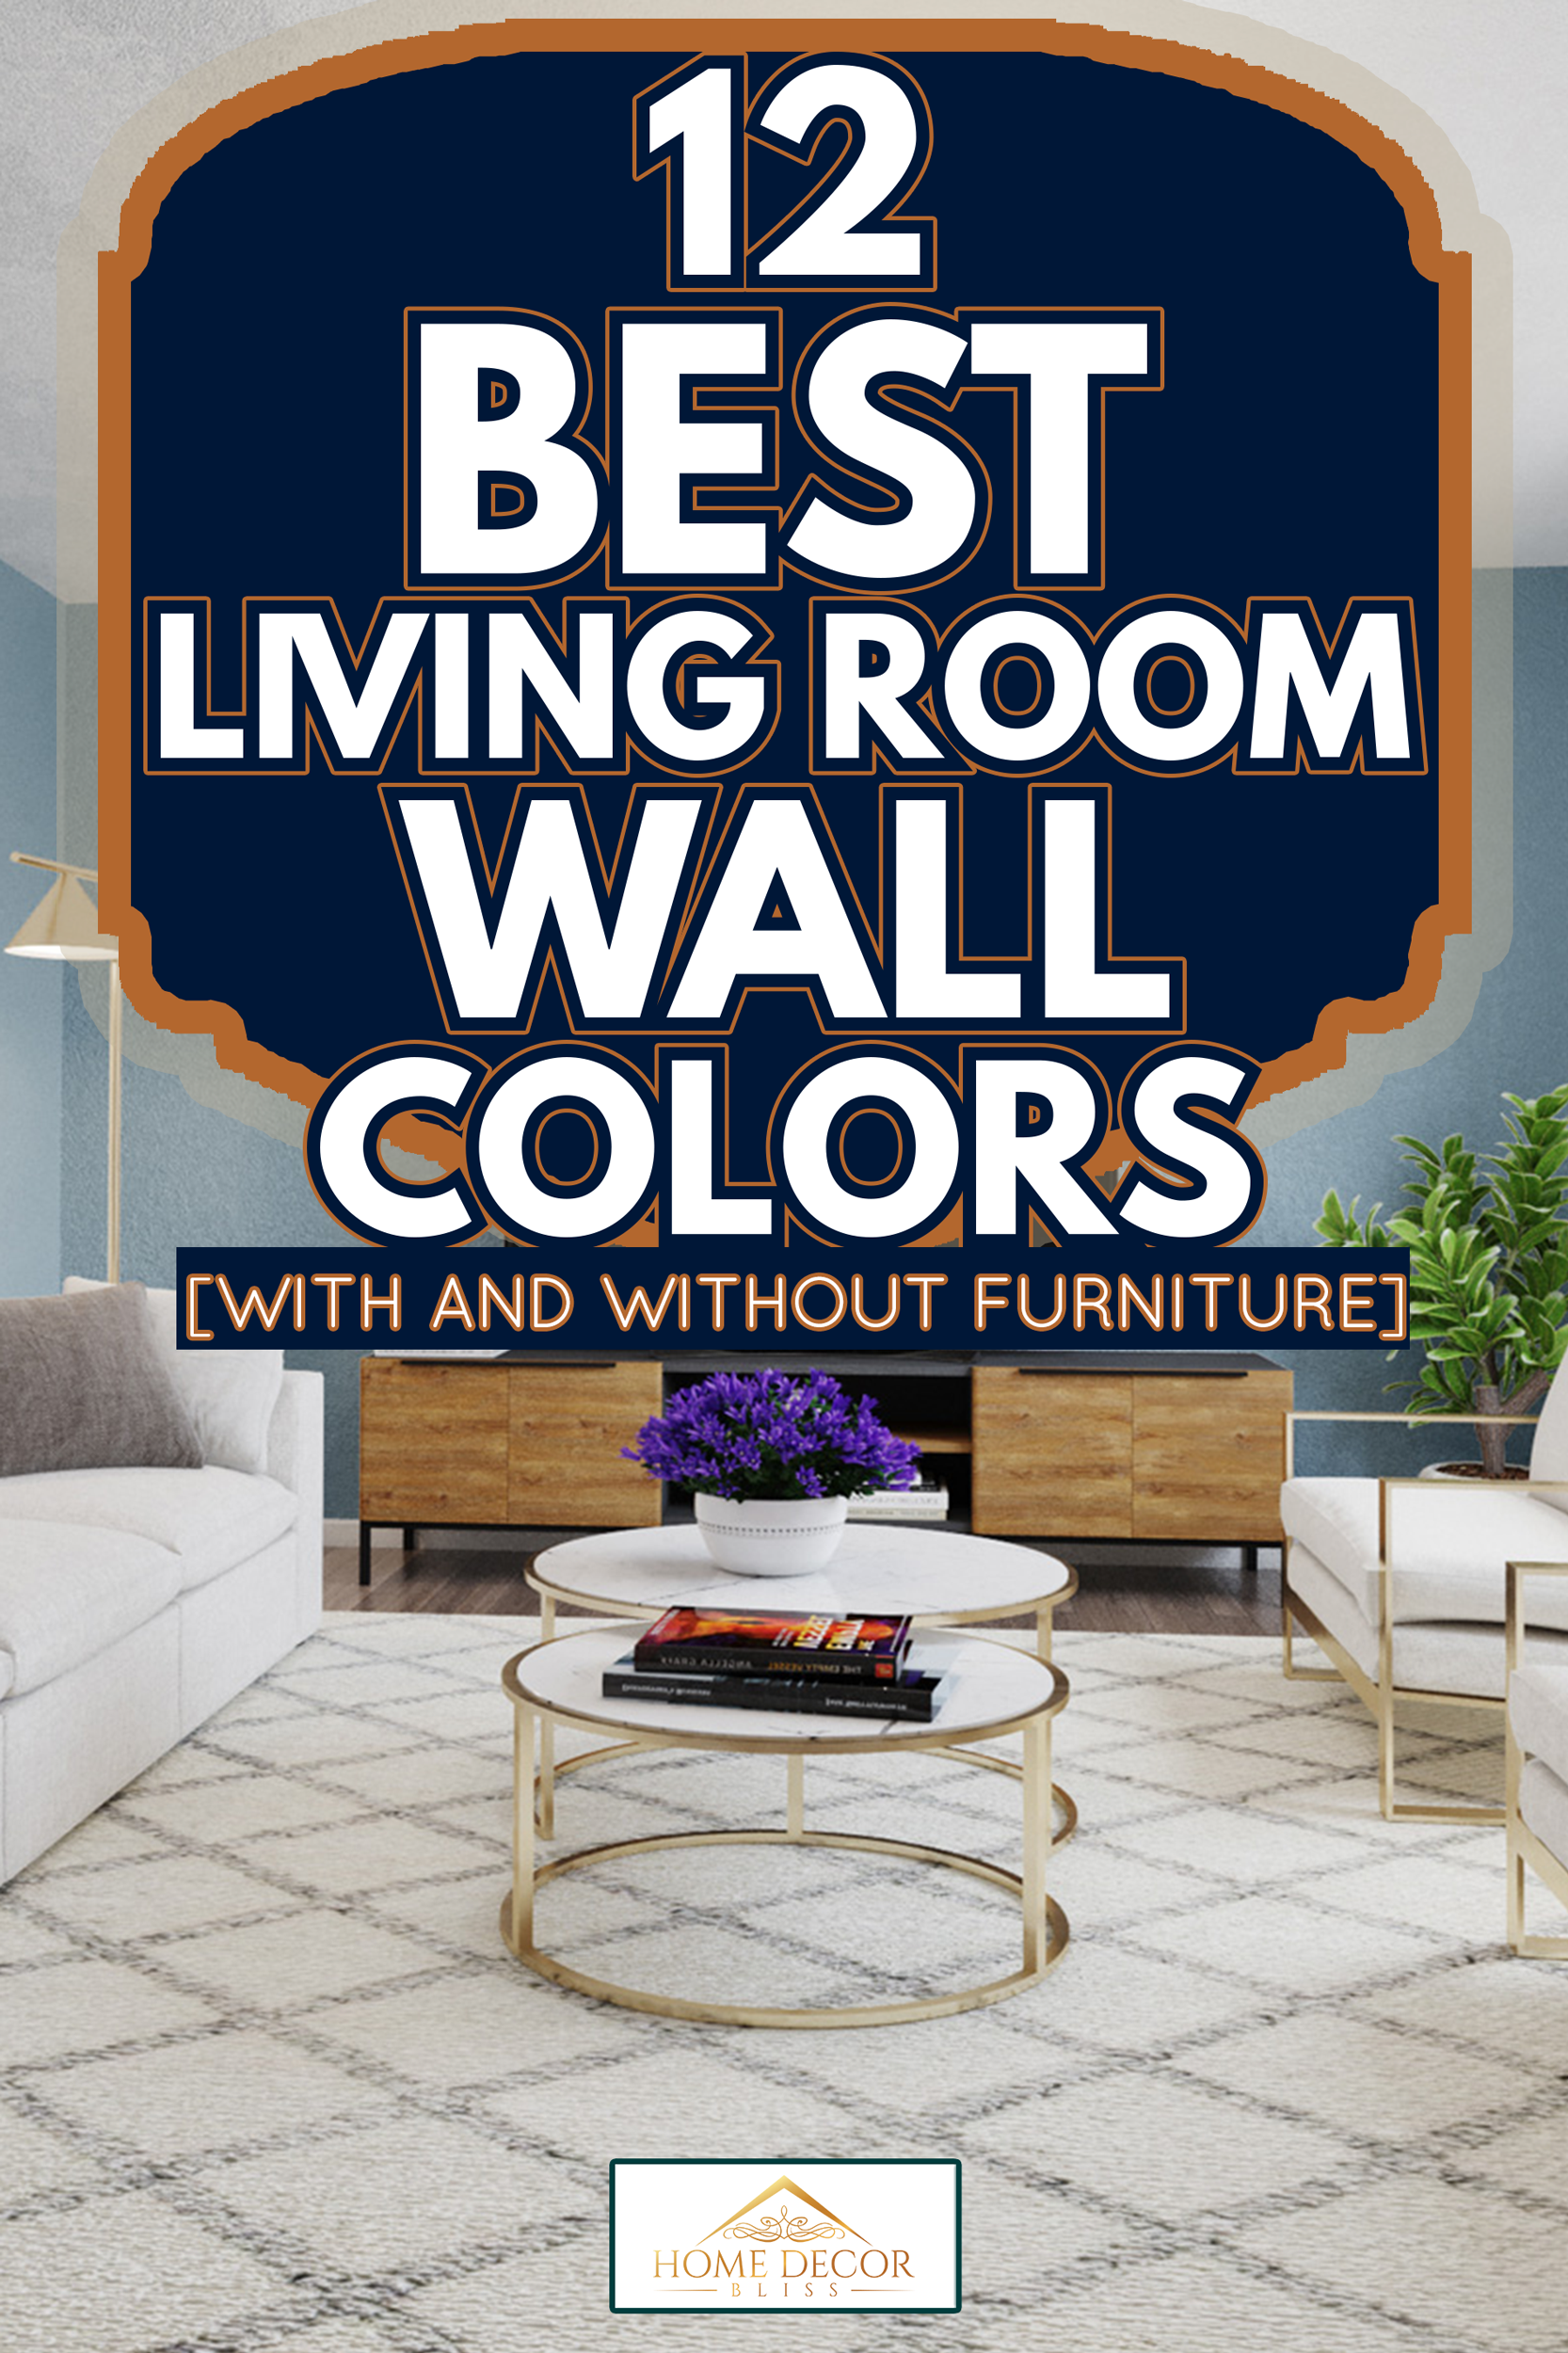 Old English Living room transformed with navy blue walls - 12 Best Living Room Wall Colors [With And Without Furniture]